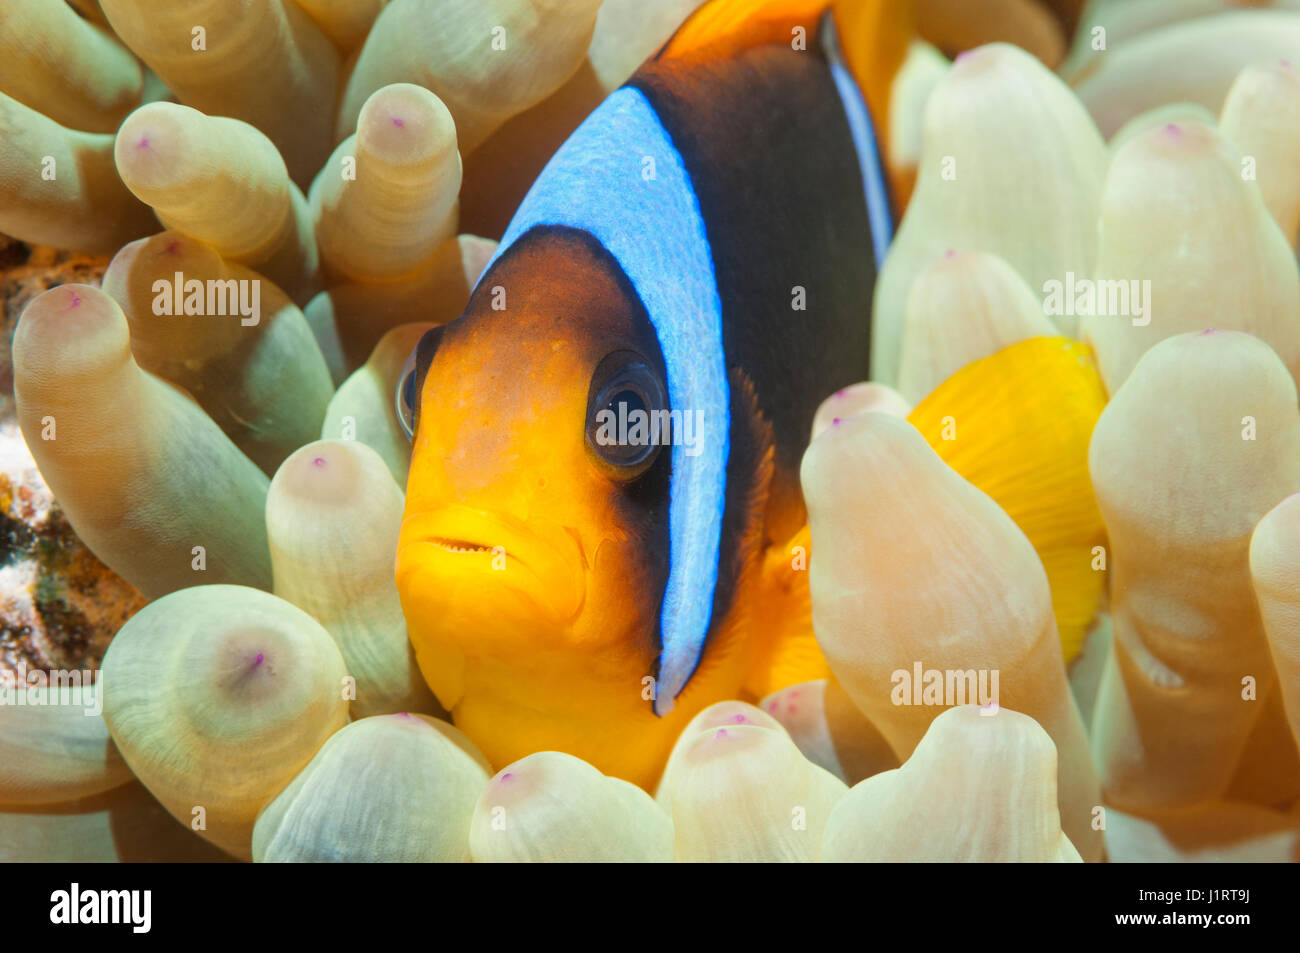 Red Sea anemonefish [Amphiprion bicinctus] in  Magnificent anemone [Heteractis magnifica].  Egypt, Red Sea. Stock Photo